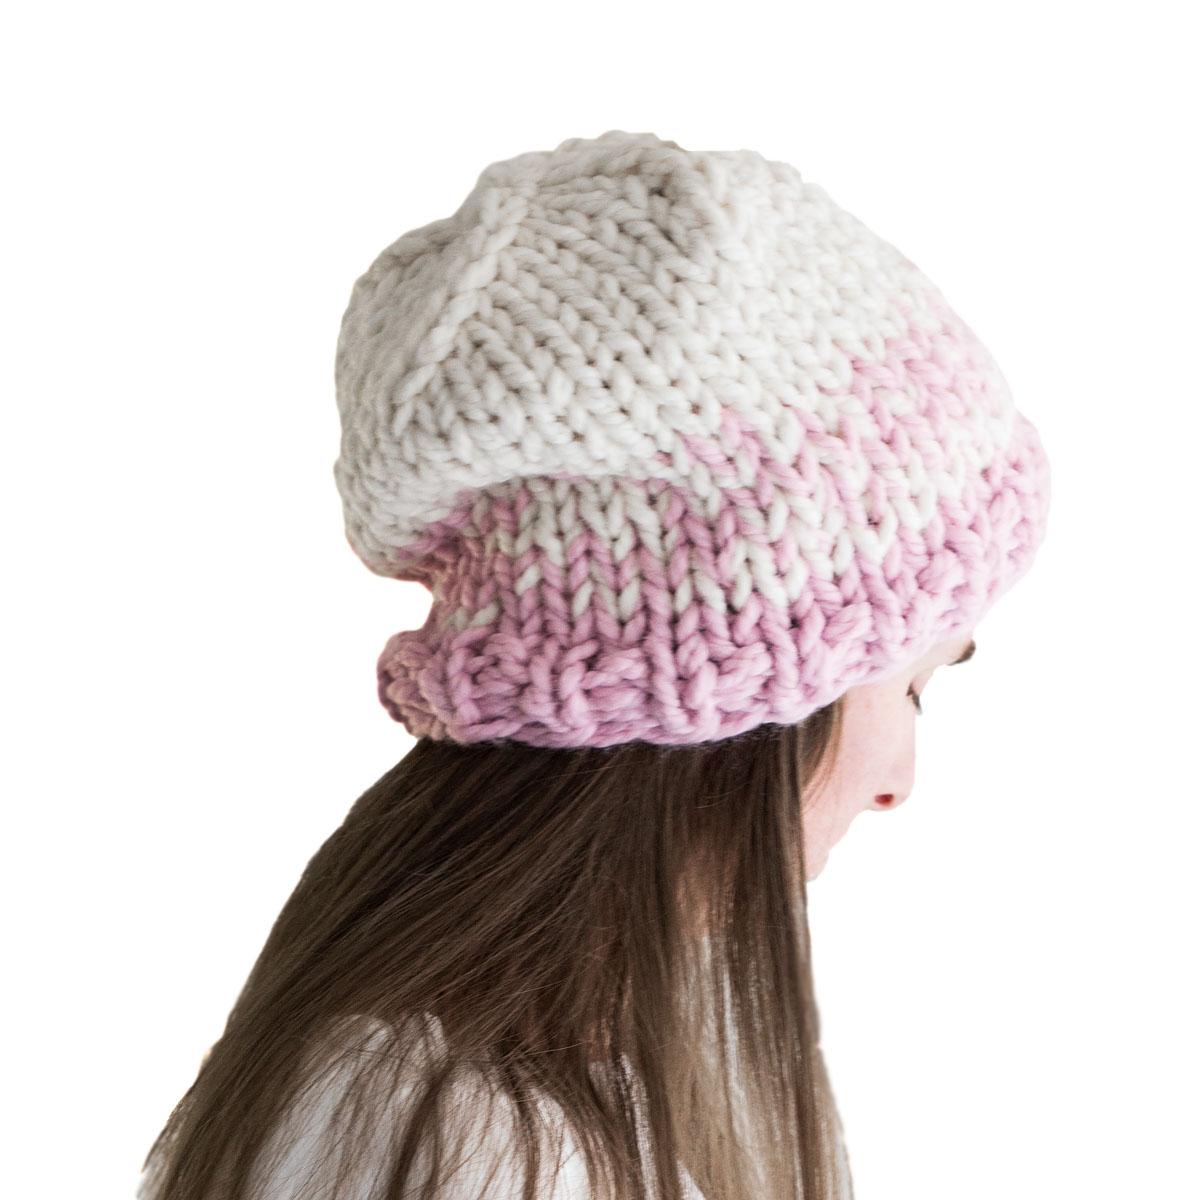 Hats To Knit Free Patterns The Best Super Bulky Hat Knitting Pattern